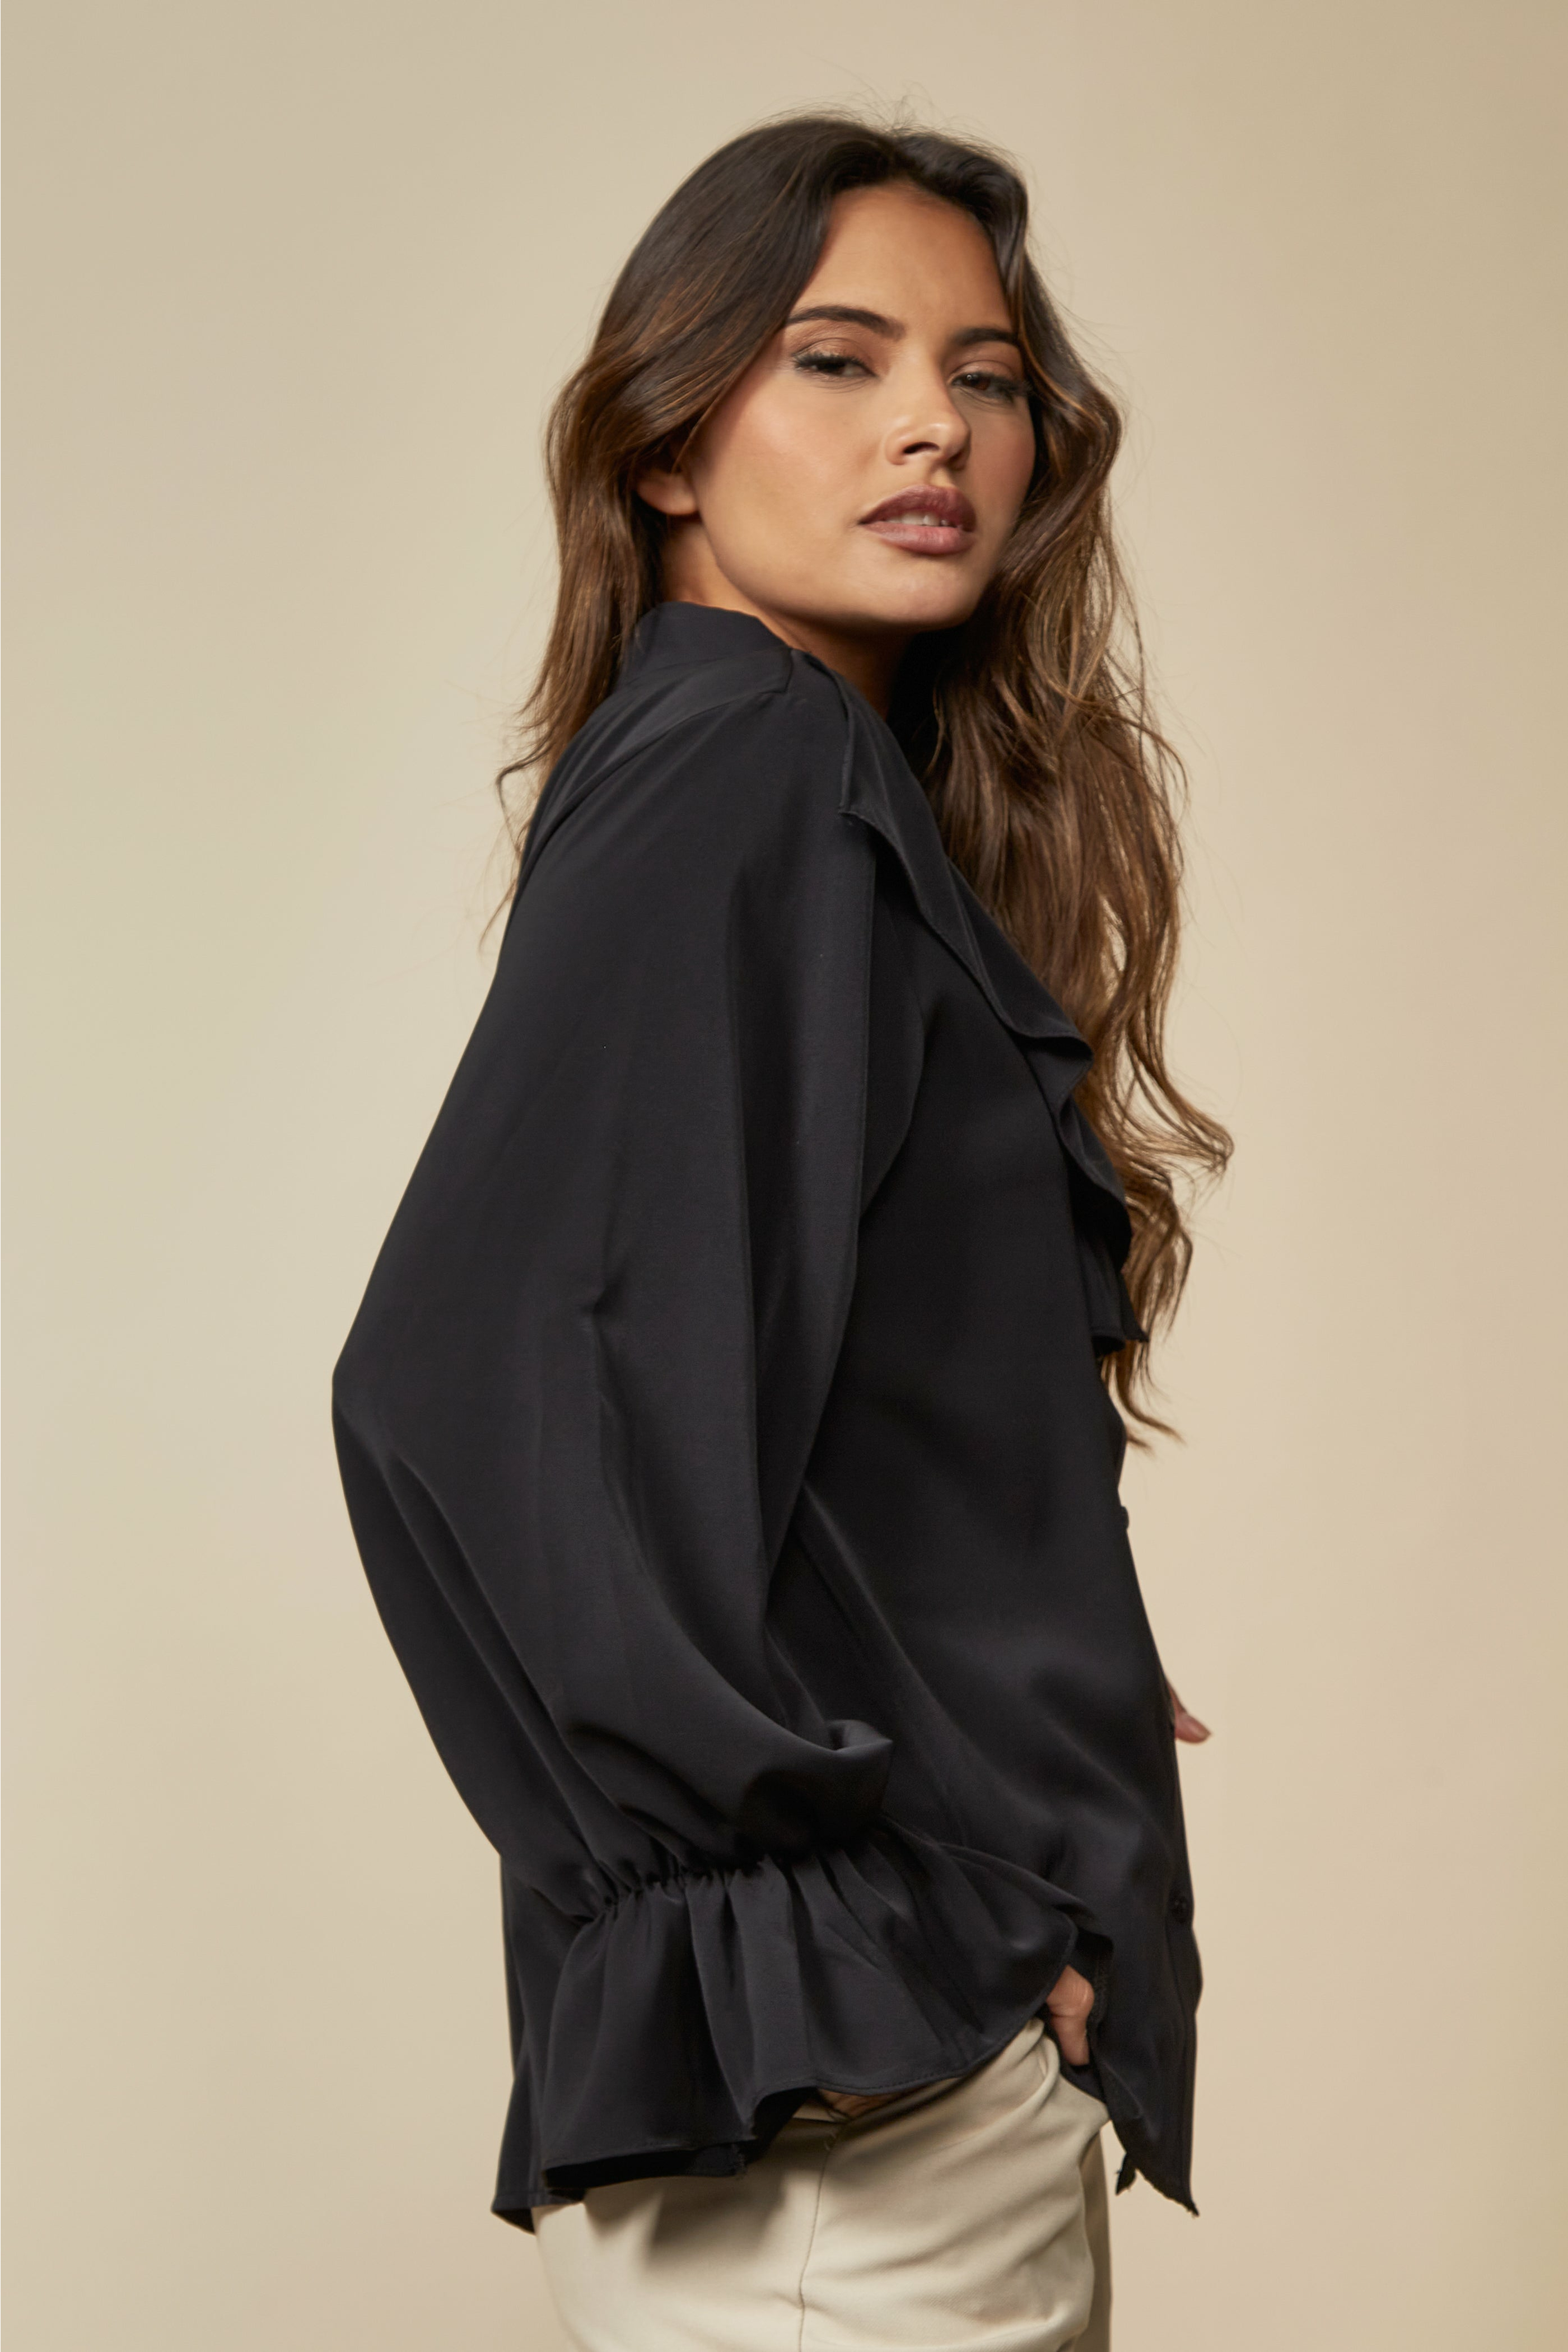 Ruffle Detailed Front with Ruffle Sleeves Shirt in Black GLR FASHION NETWORKING